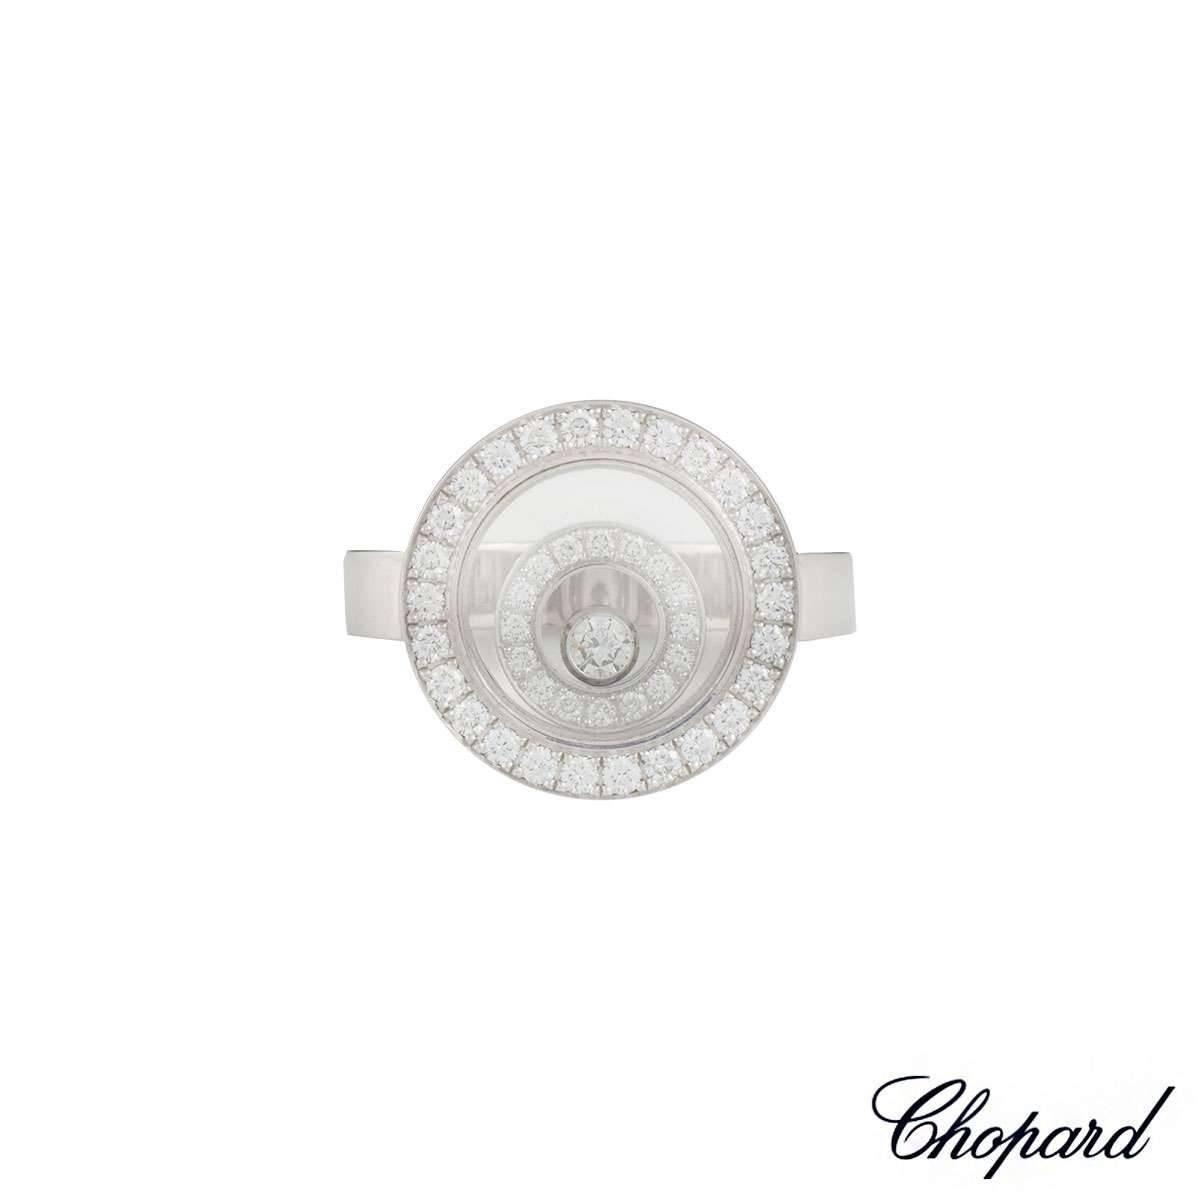 An very sparkly 18k white gold ring from the Happy Spirit collection by Chopard. The circular ring consists of a diamond set outer case with a further diamond set circular floating motif, complimented by a single floating diamond in the centre. The